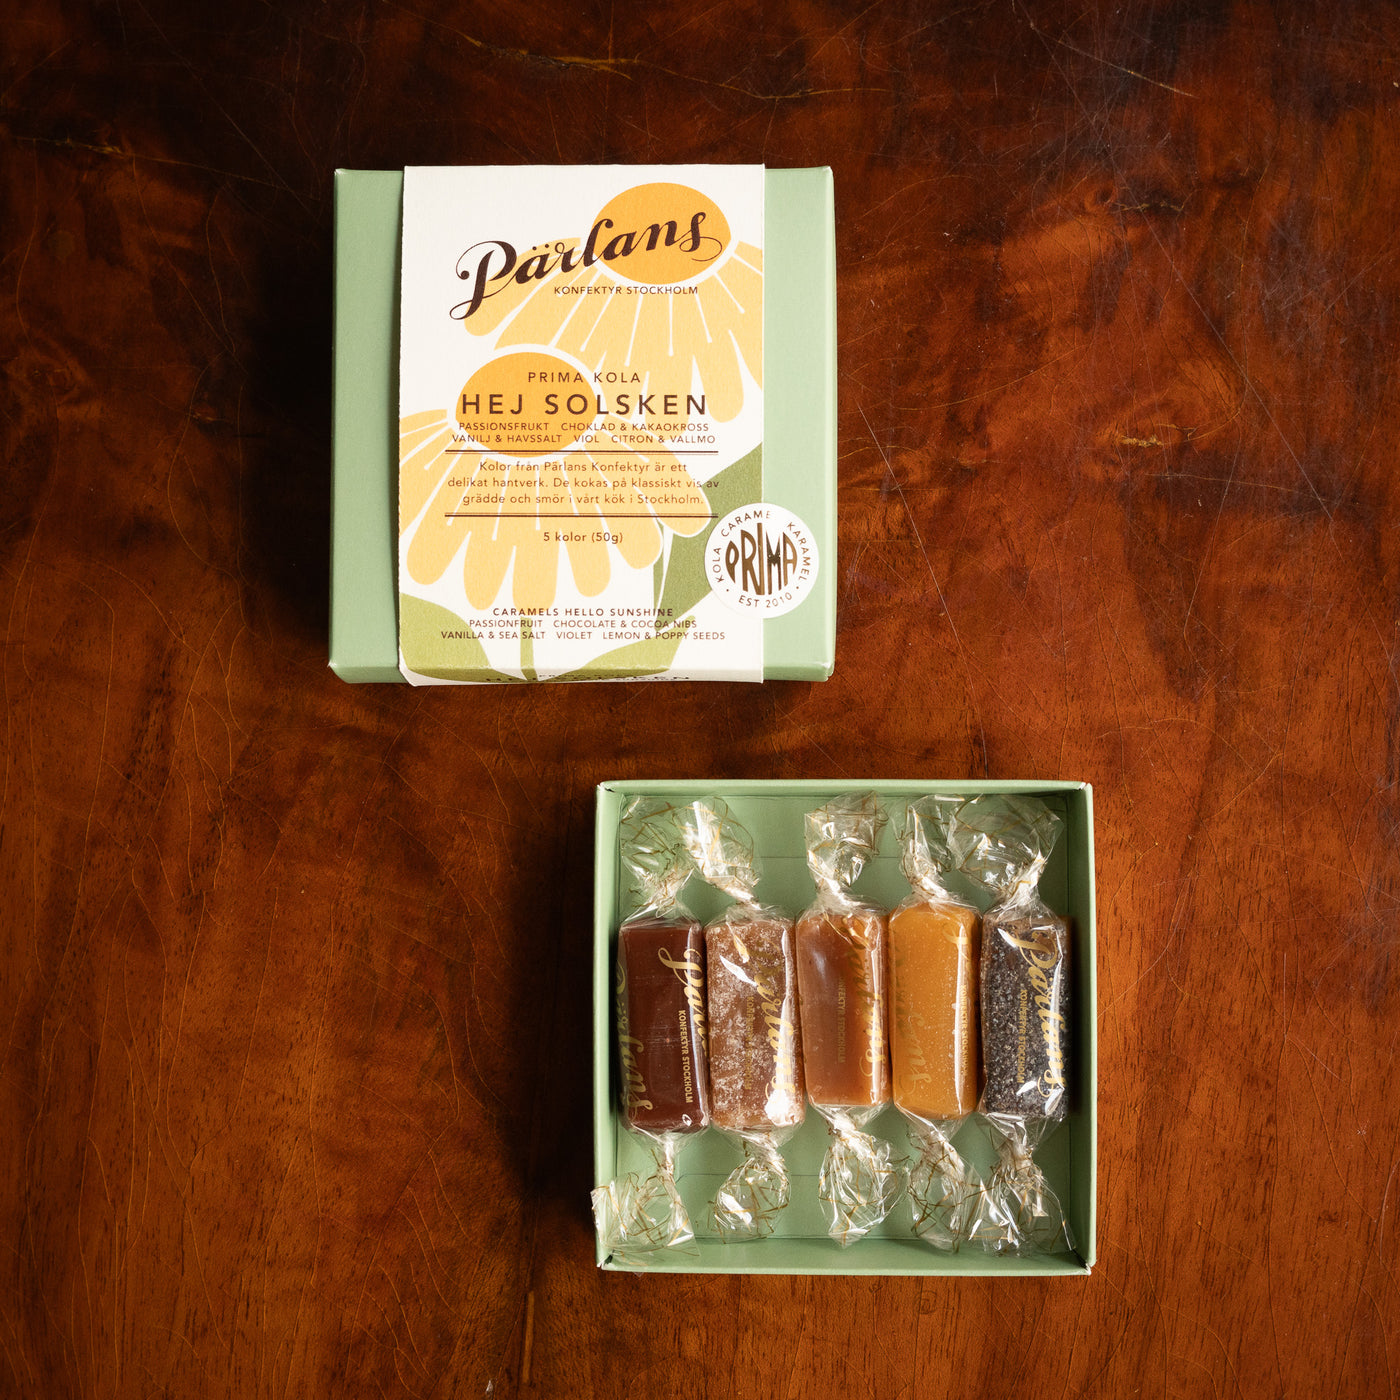 A small box full of sunshine in the form of soft creamy caramels from us at Pärlans. Handmade with care in our kitchen in Stockholm.